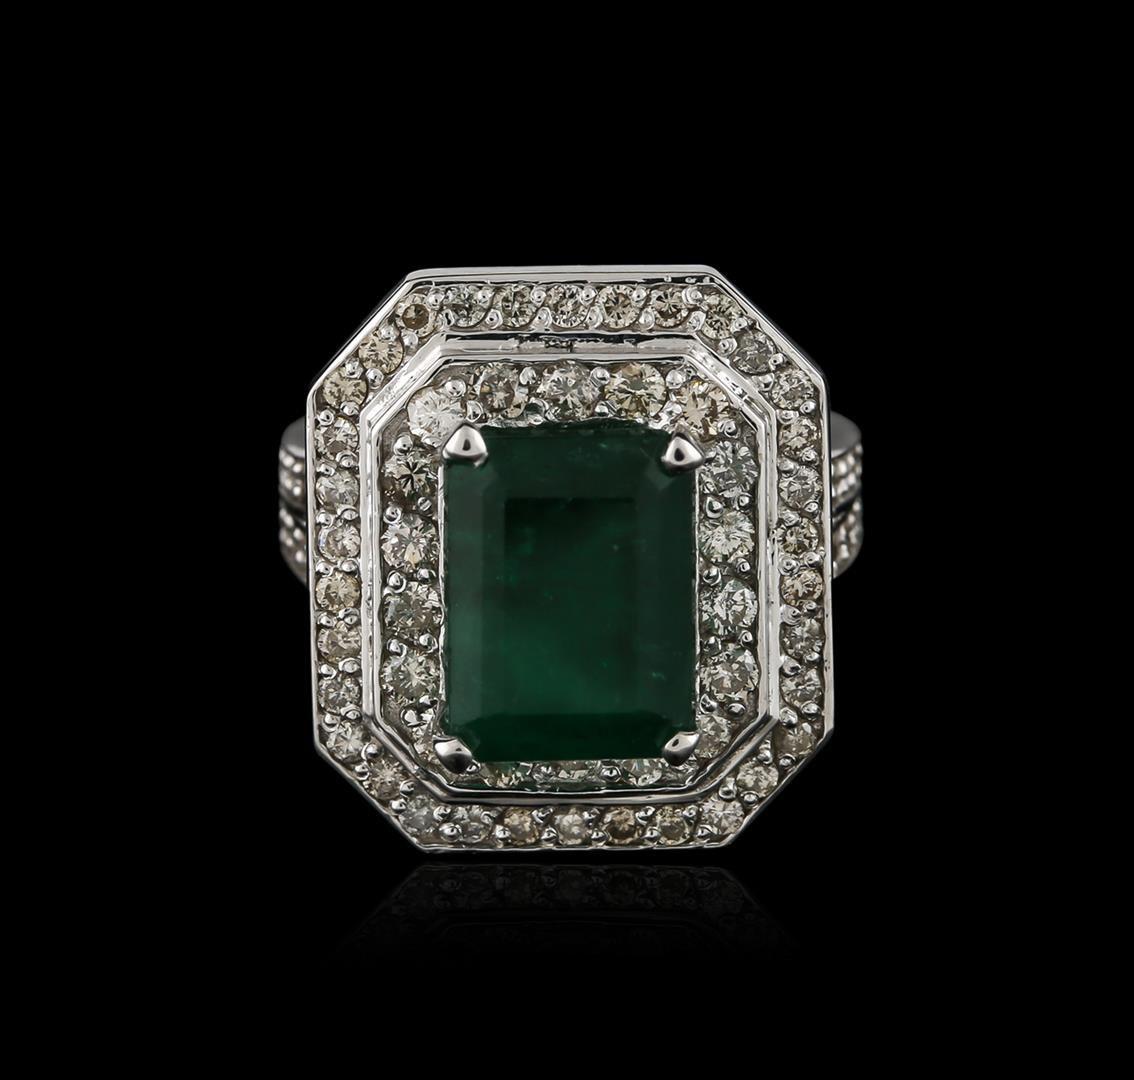 14KT White Gold 3.28 ctw Emerald and Diamond Ring